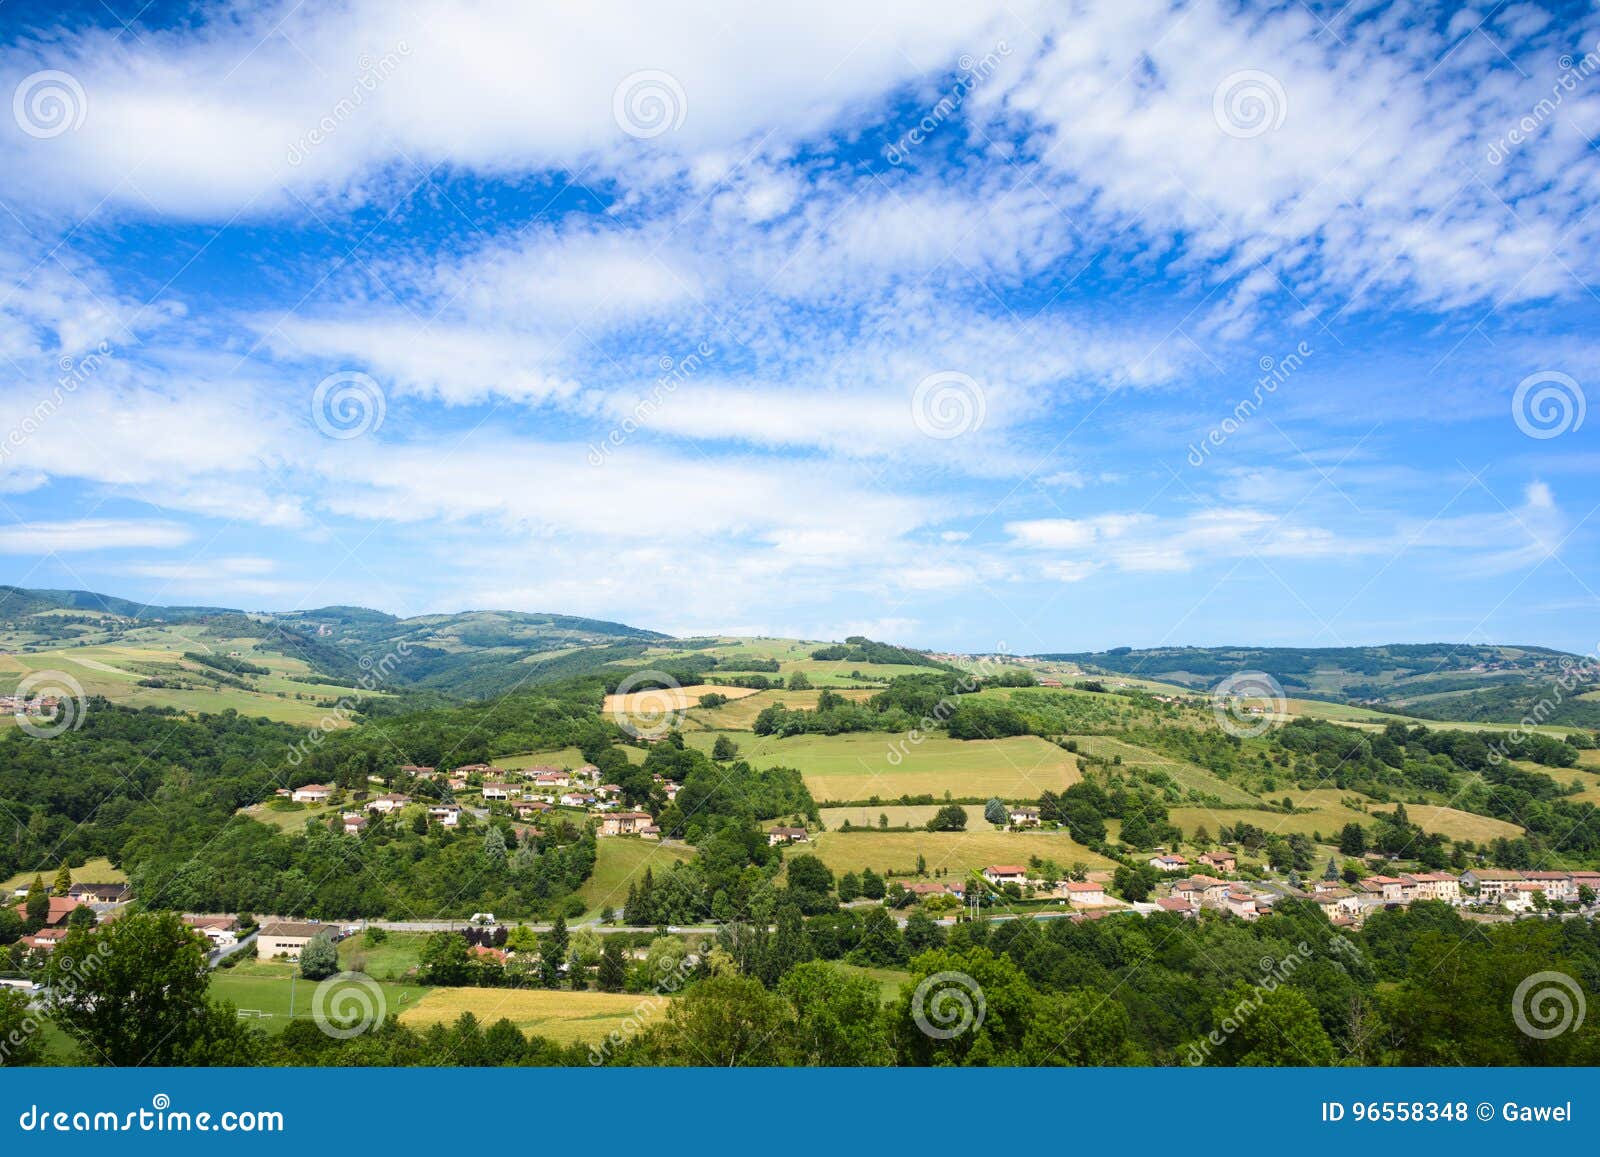 landscape around ternand and letra villages in beaujolais